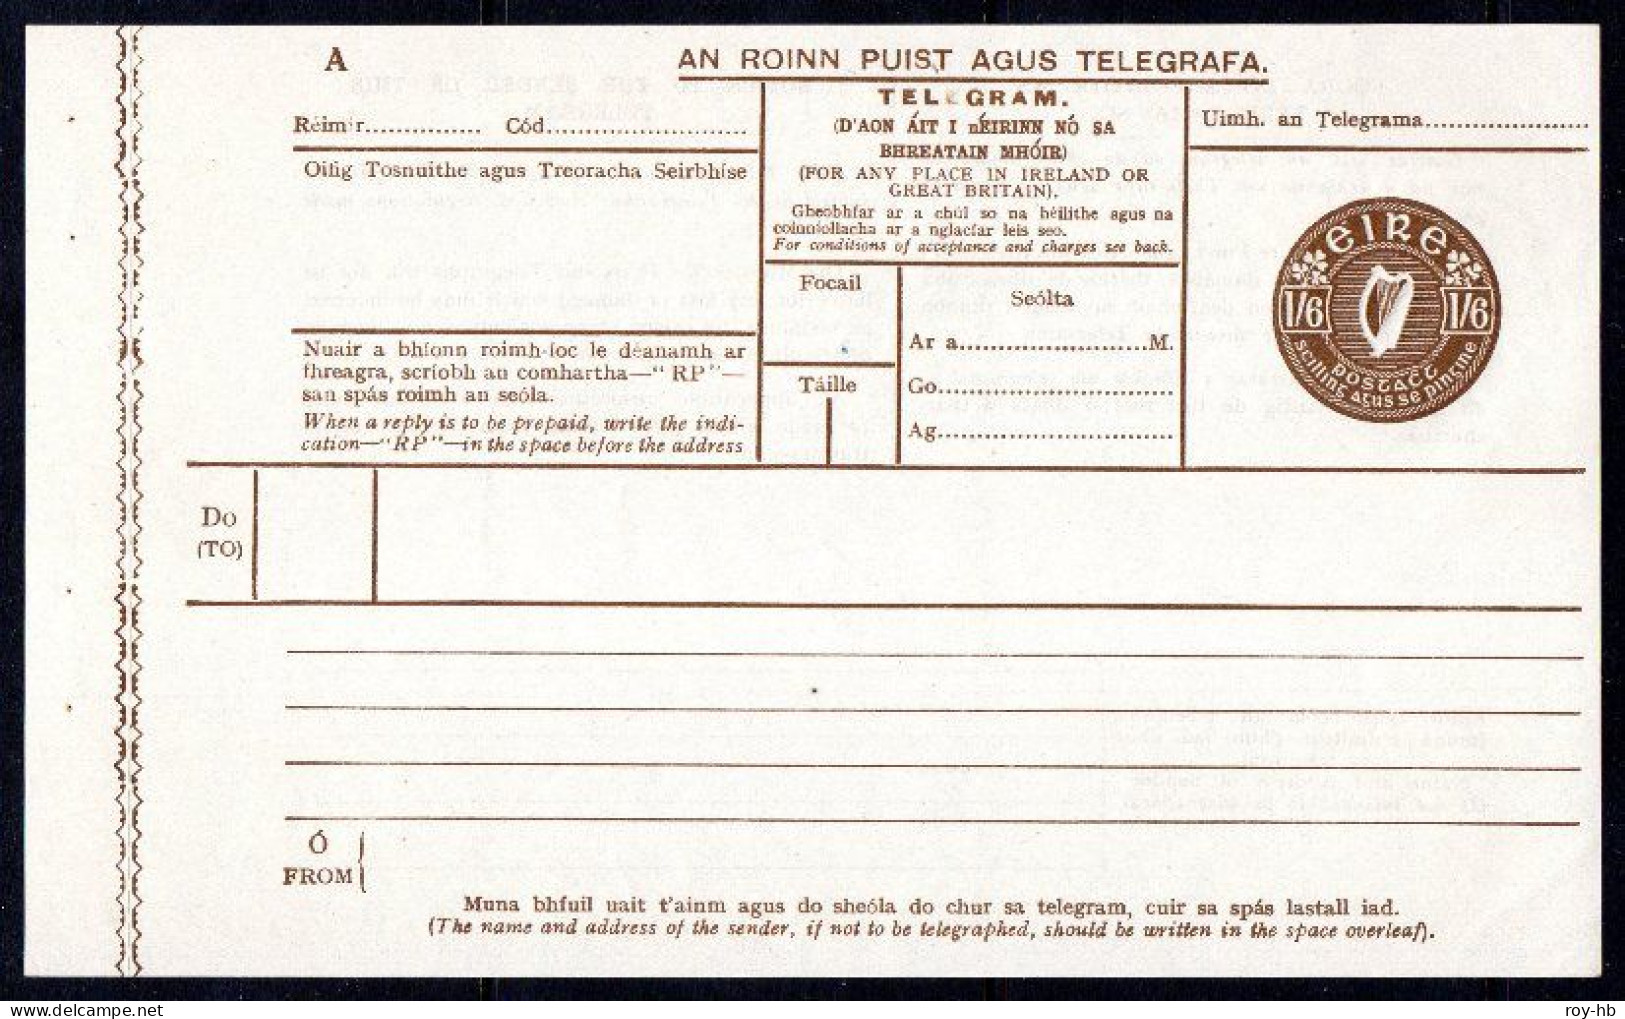 Telegram Form, 1929 1/6 "all Brown" With Original Interleaving Showing A Clear Albino Impression Of The Indicia. - Ganzsachen